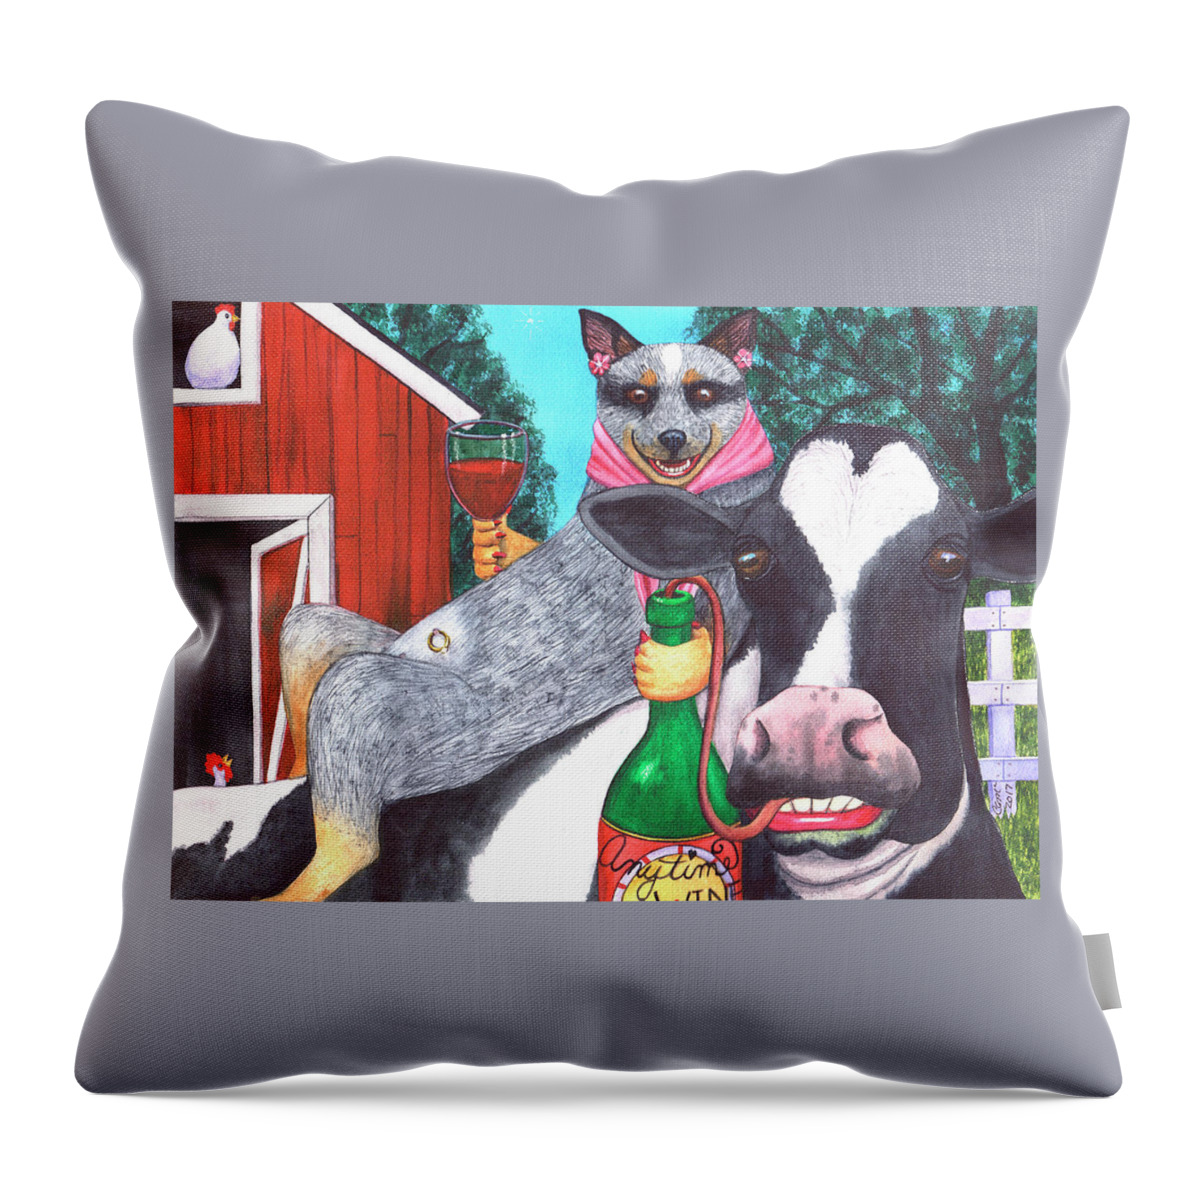 Wine Throw Pillow featuring the painting We'll be wining til all the cows come home by Catherine G McElroy